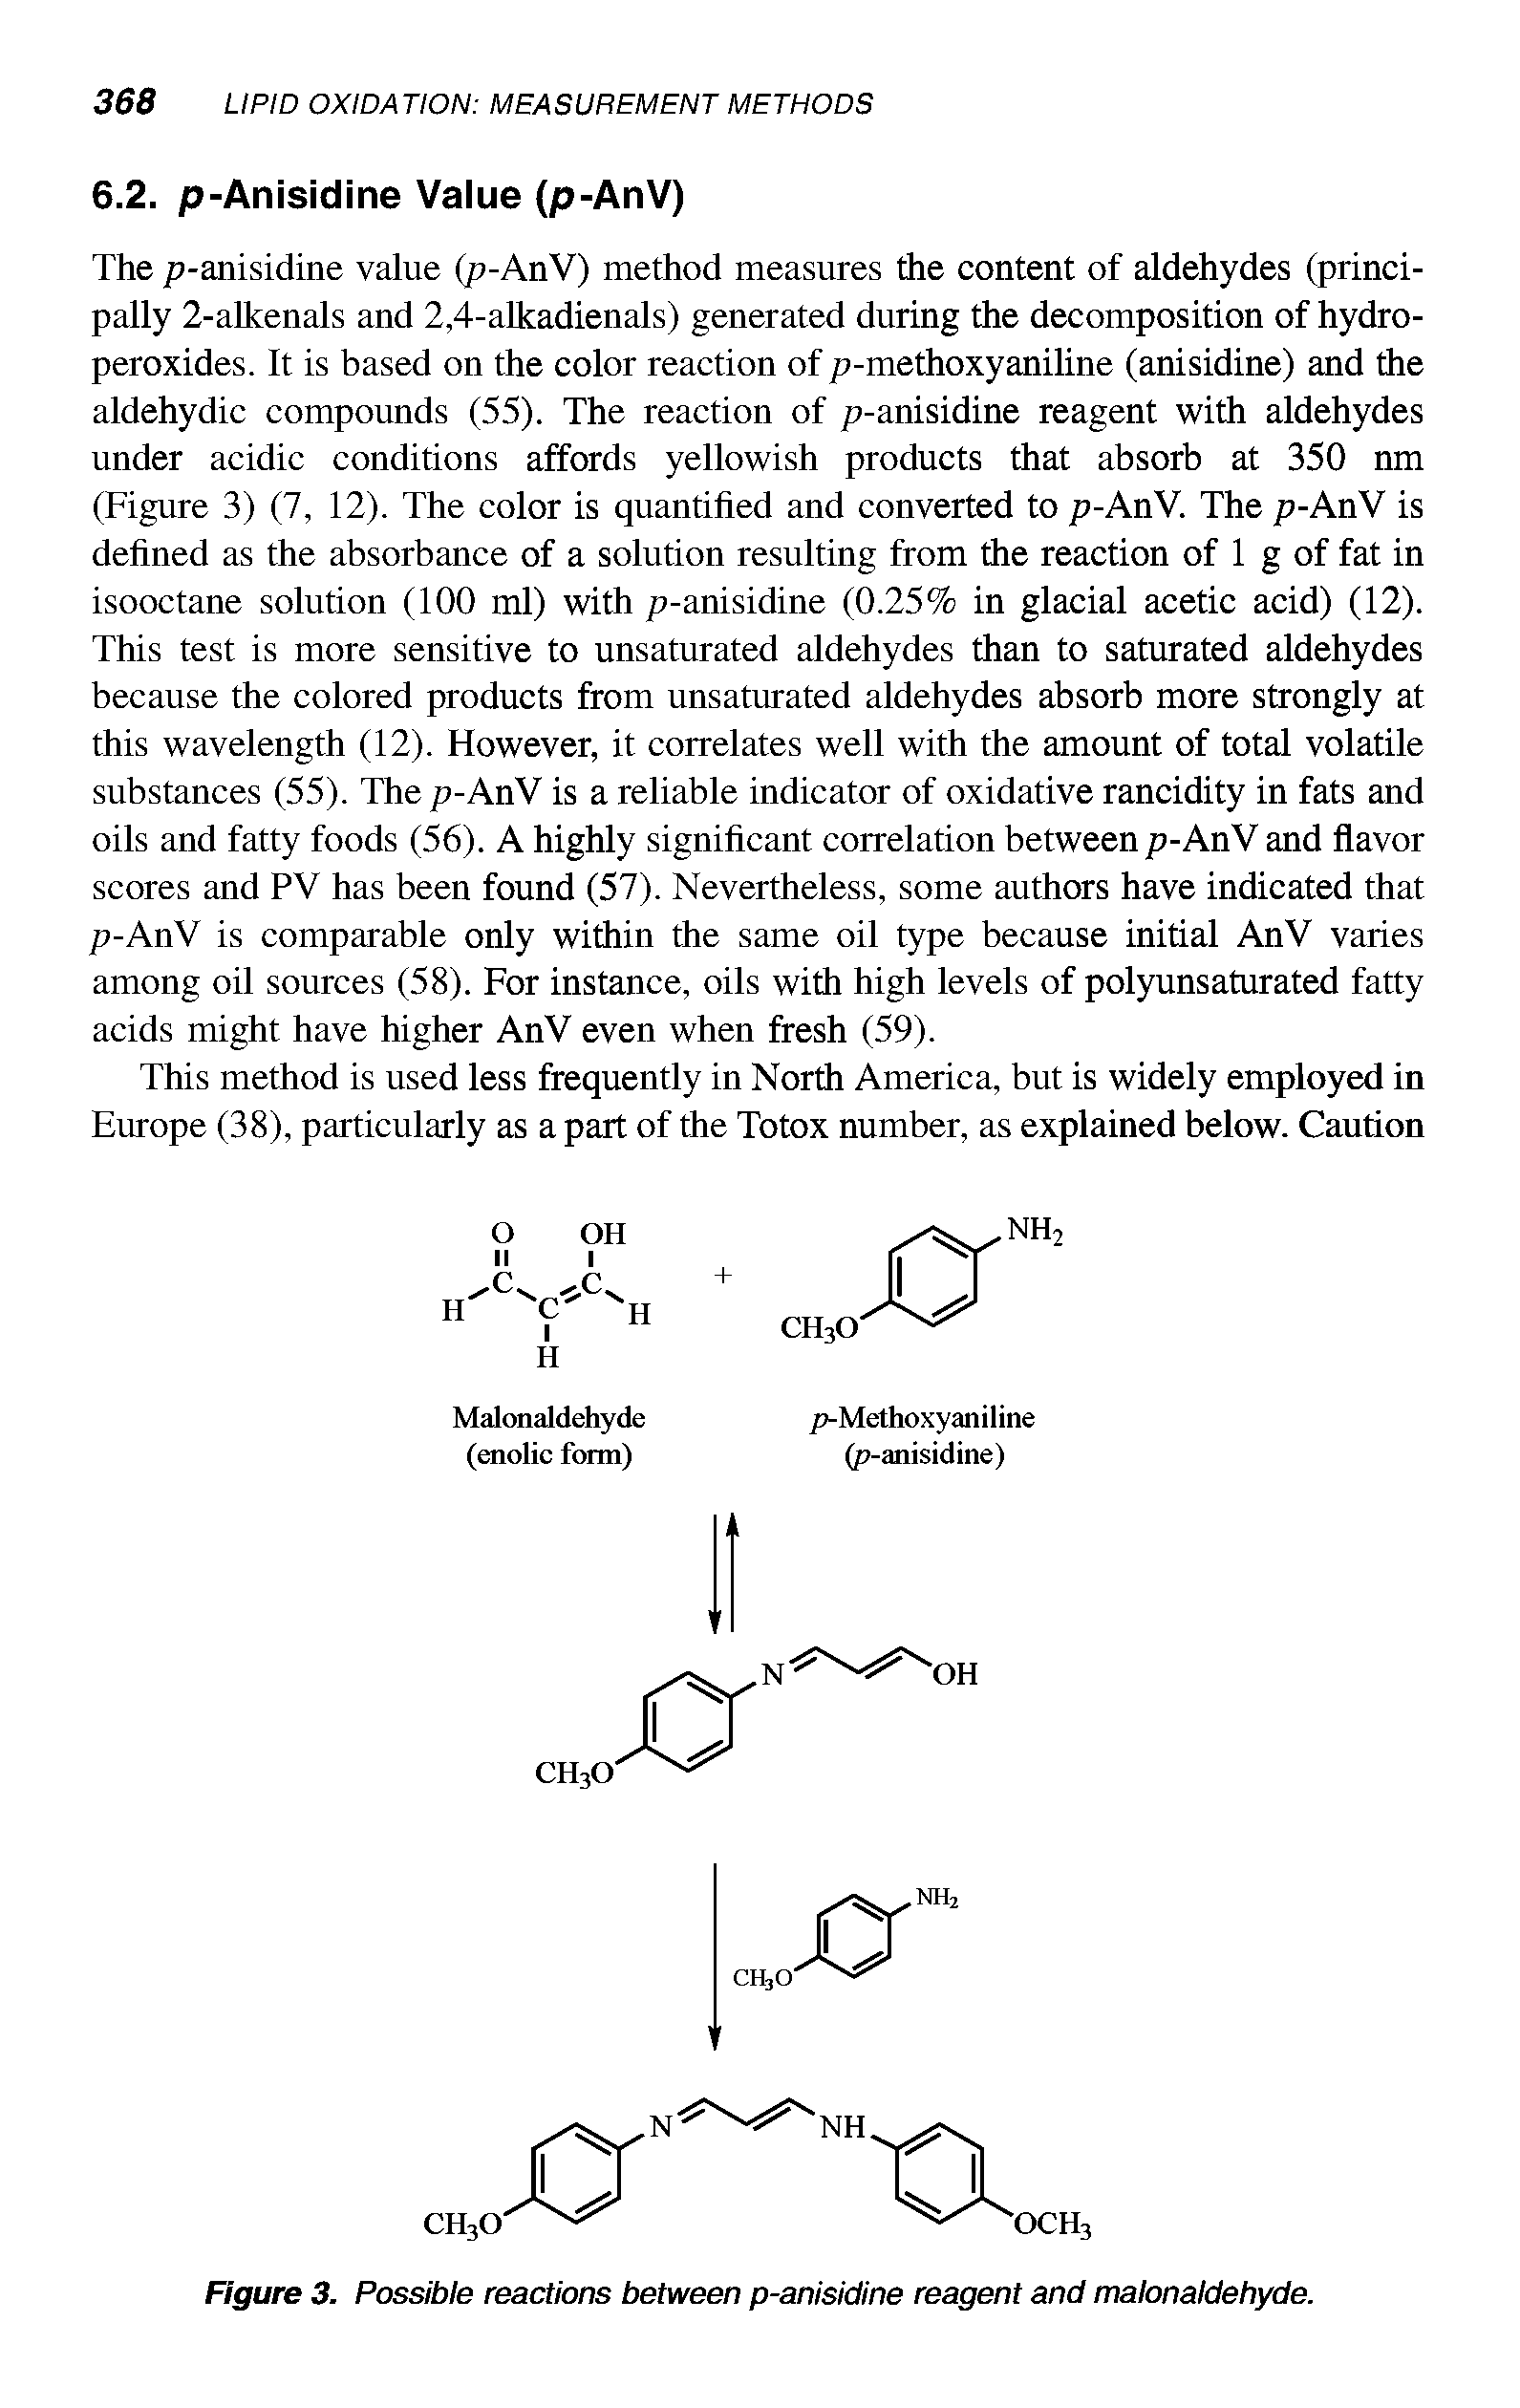 Figure 3. Possible reactions between p-anisidine reagent and malonaldehyde.